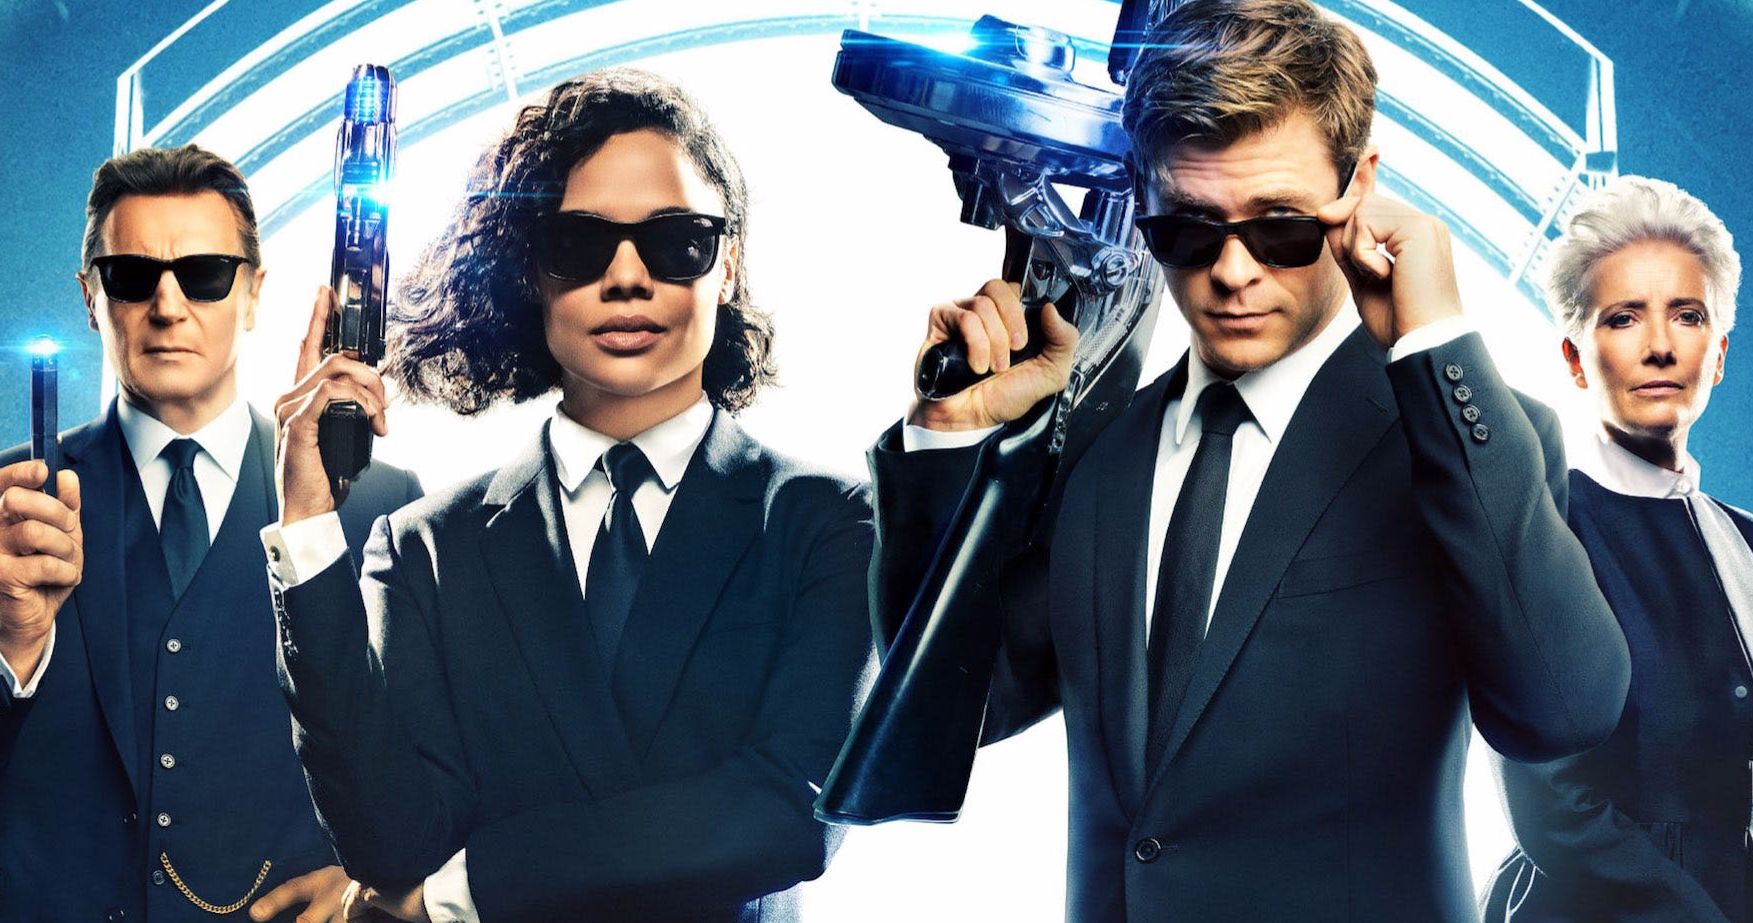 Why Men In Black: International Wasn't a Bigger Hit According to Sony Boss